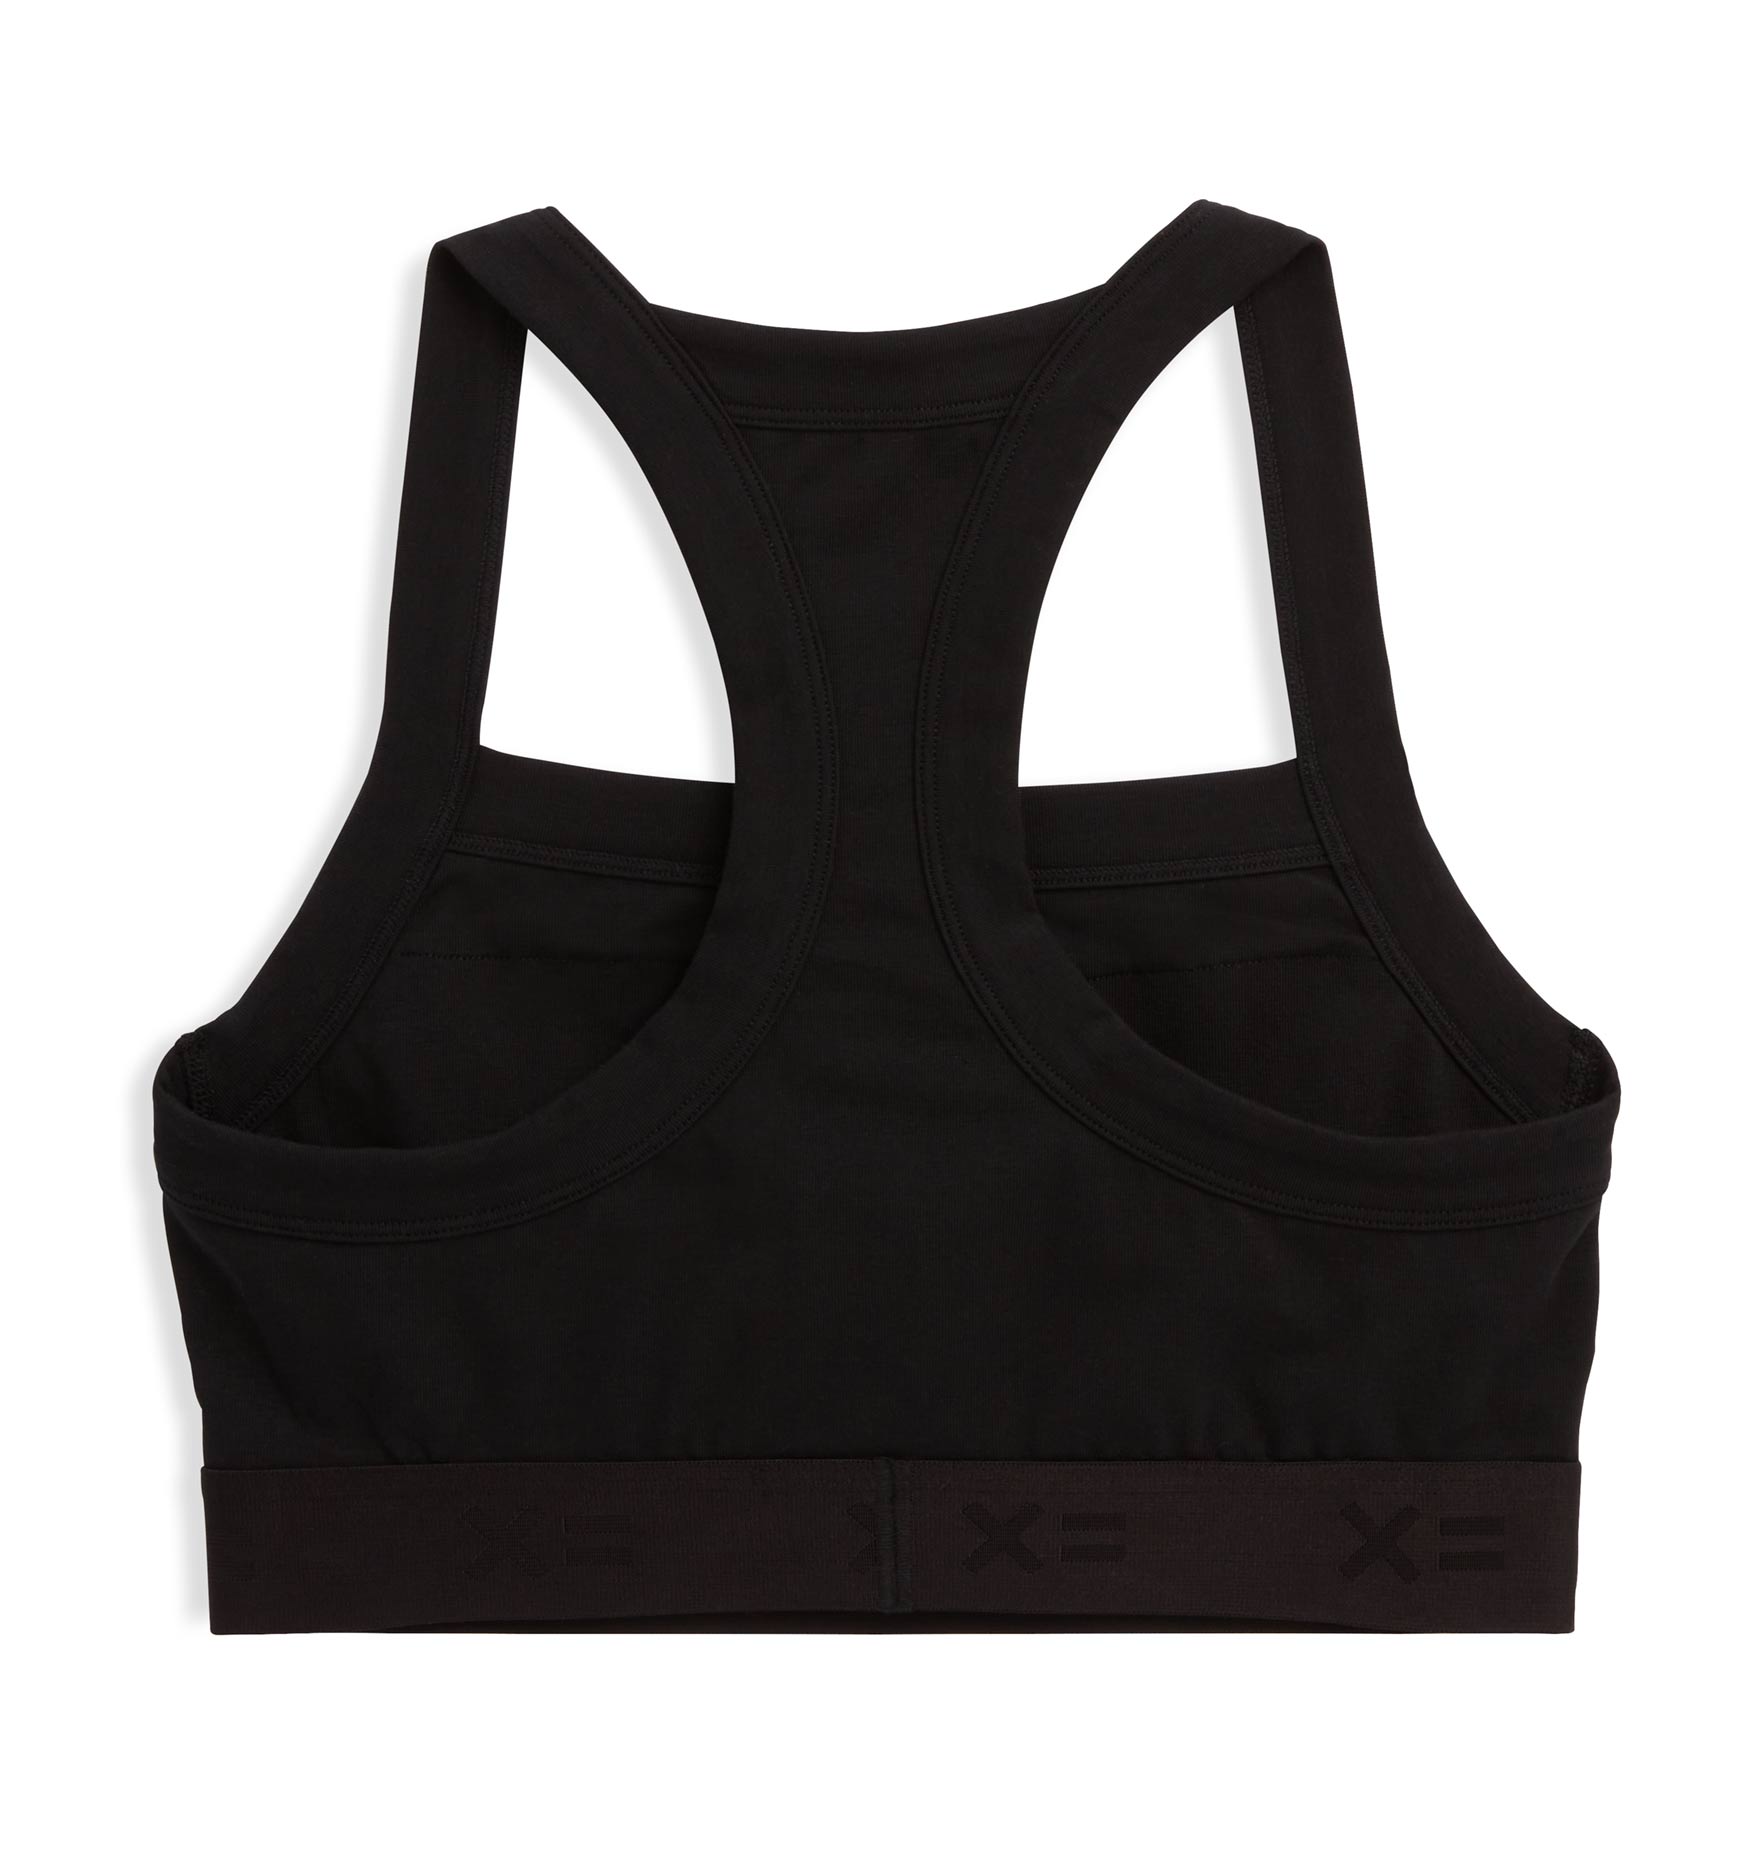 Target Tomboy X LGBTQ+ Large Pride Racerback Sports Bra Multiple - $16 (20%  Off Retail) New With Tags - From SmallTown